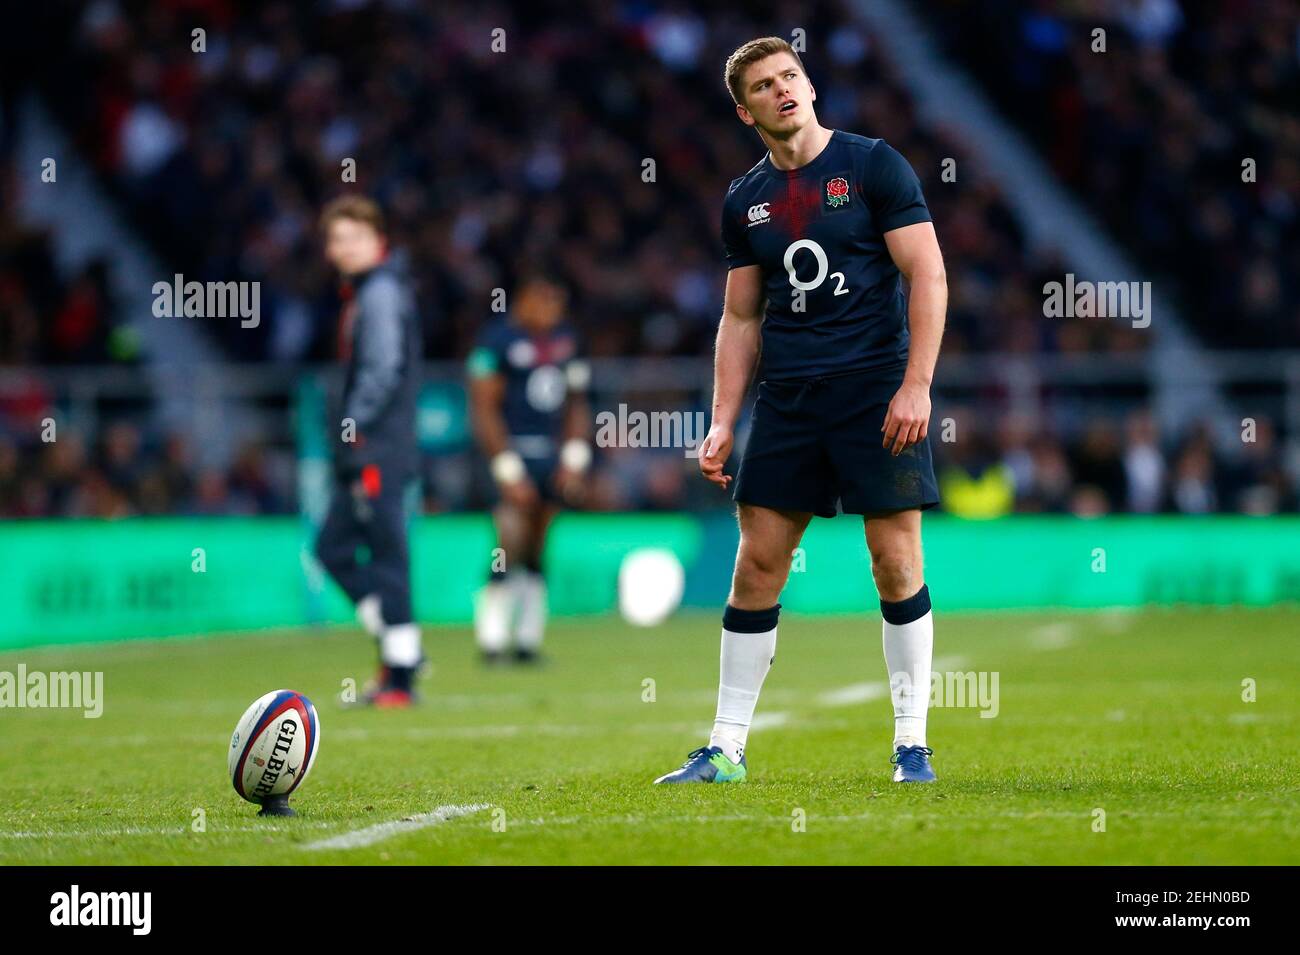 Britain Rugby Union - England v Fiji - 2016 Old Mutual Wealth Series - Twickenham Stadium, London, England - 19/11/16 England's Owen Farrell prepares to kick a conversion Reuters / Andrew Winning Livepic EDITORIAL USE ONLY. Stock Photo